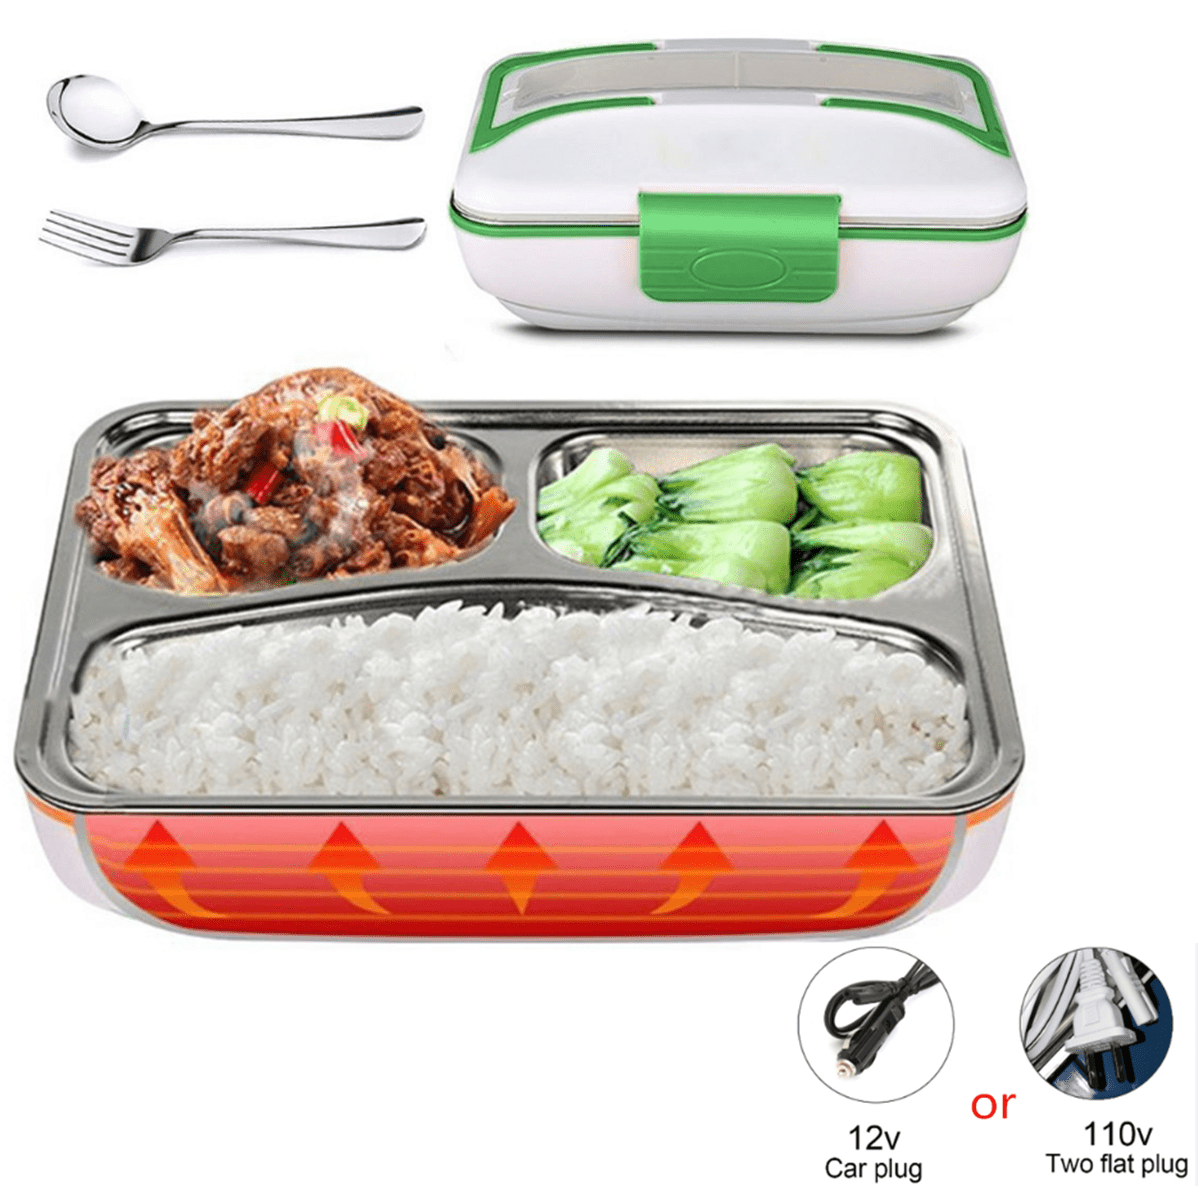 Portable Electric Heating Lunch Box Bento Heater Food Container Stainless Steel